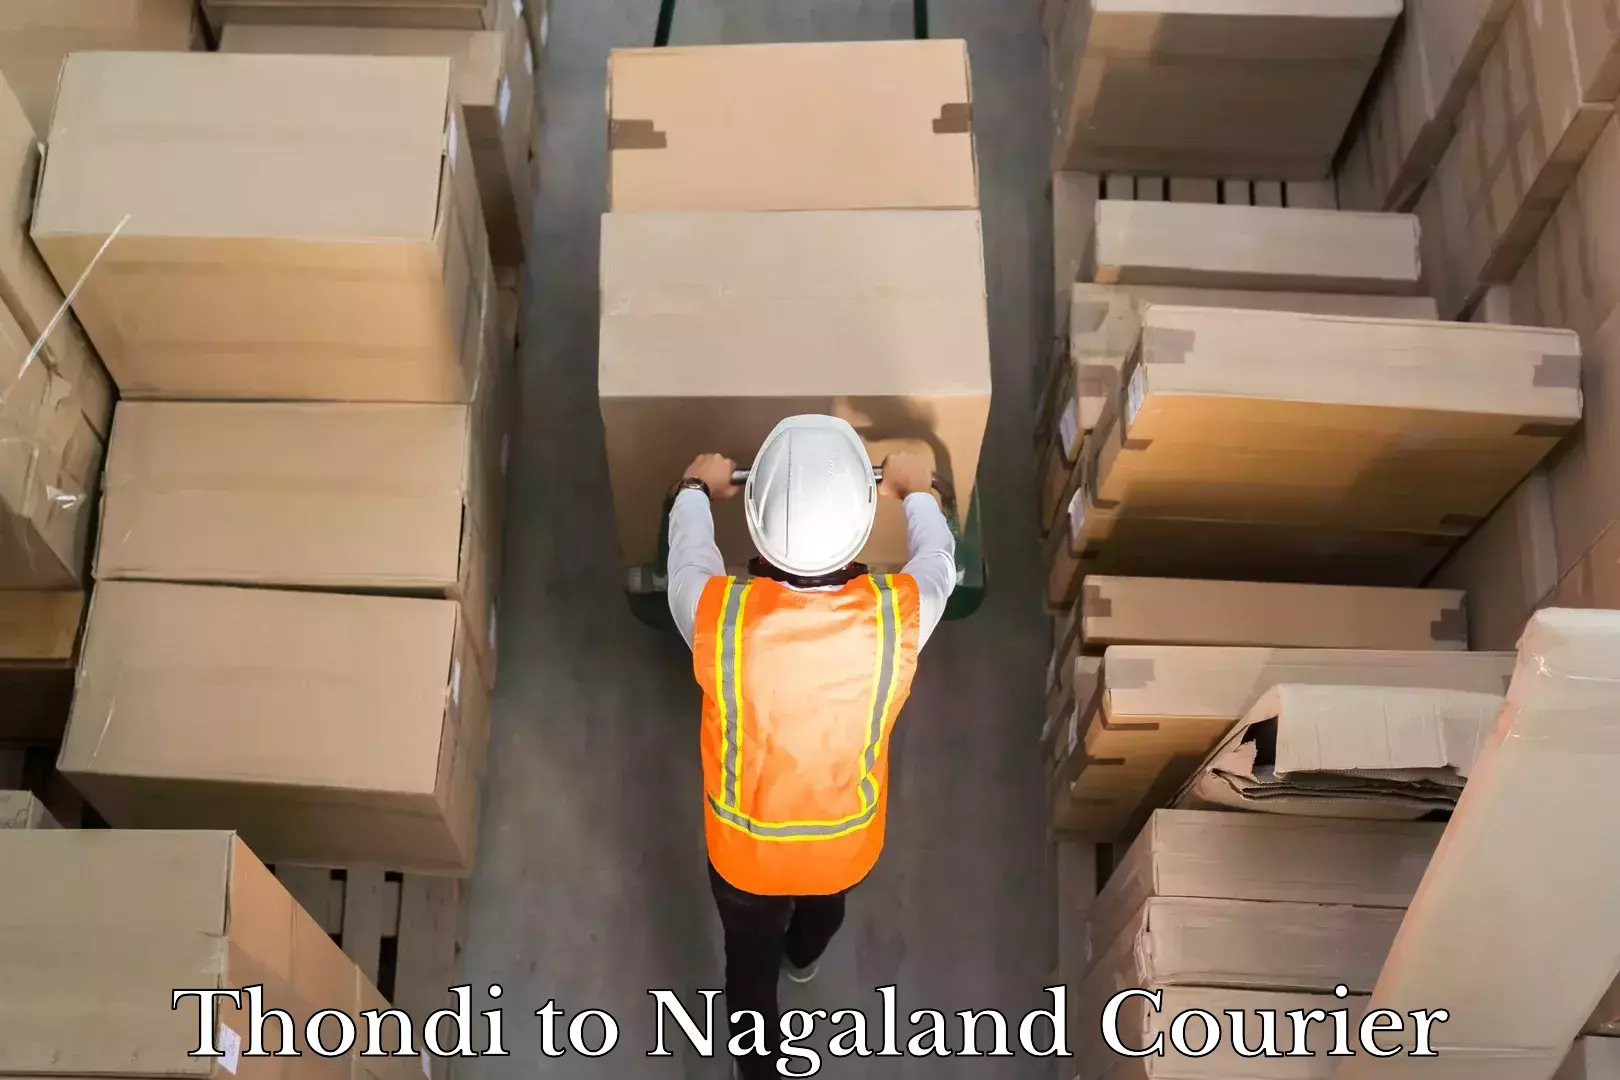 Customer-focused courier Thondi to Nagaland